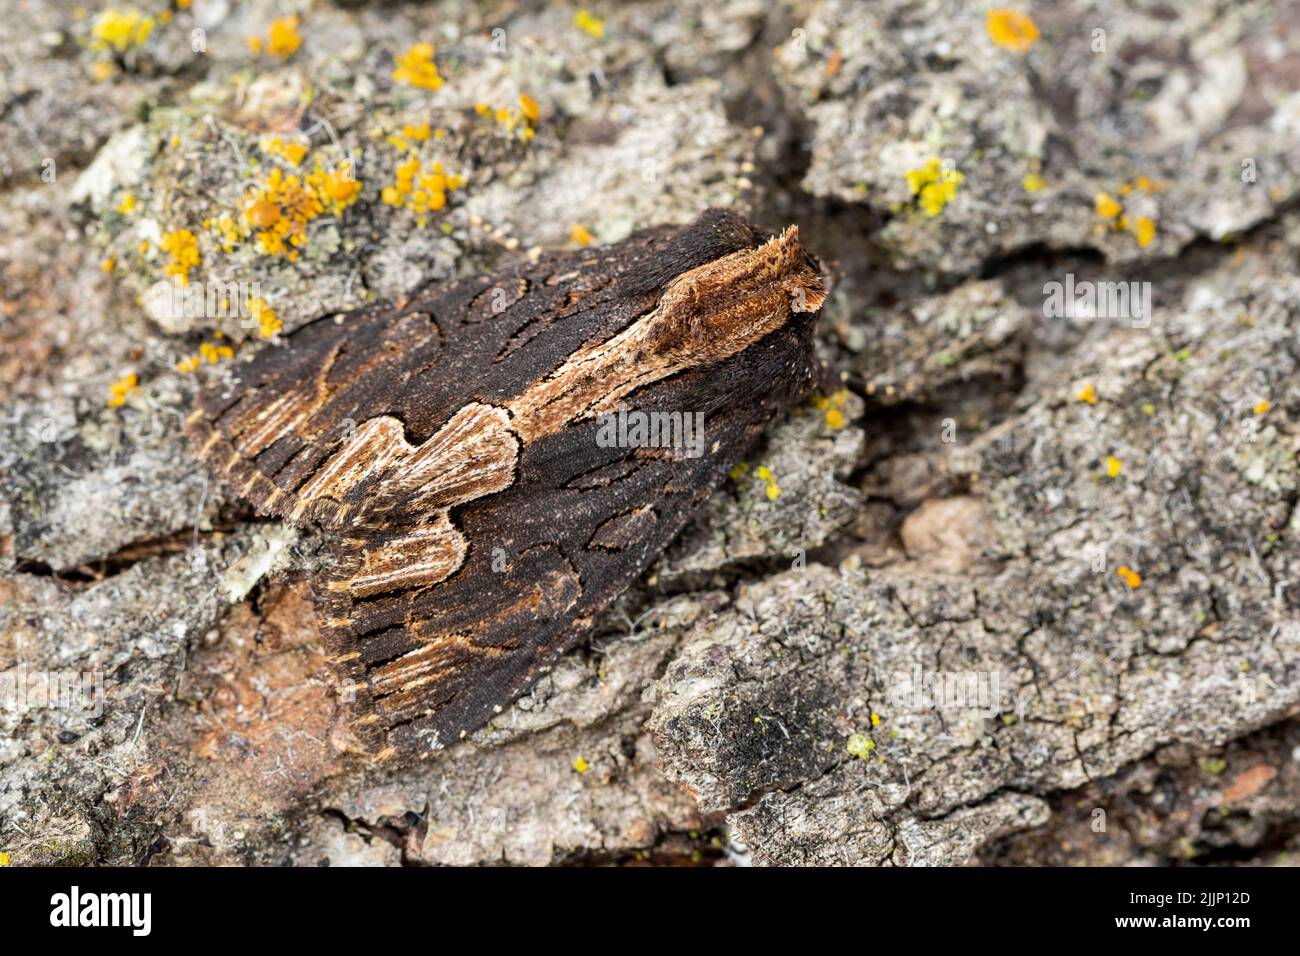 Closeup dypterygia scabriuscula moth crawling on bark of tree trunk near small yellow flowers Stock Photo